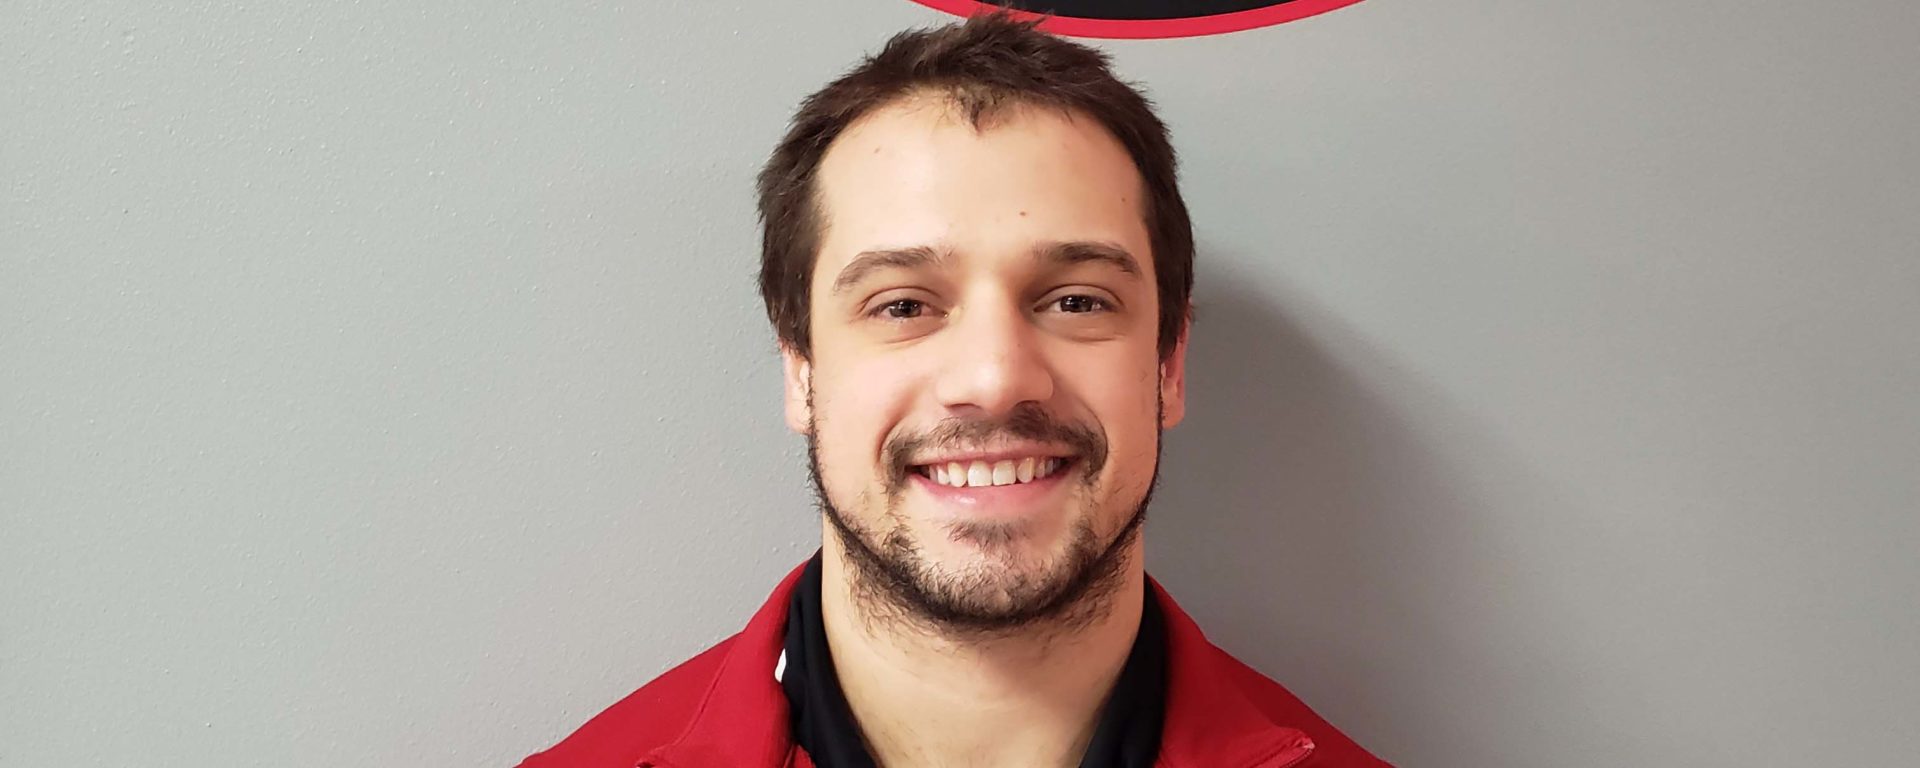 In this edition of “Catching Up,” we spoke with Dr. Gerald Dolce, a 2017 graduate from the School of Physical Therapy and Director of ATI Physical Therapy.